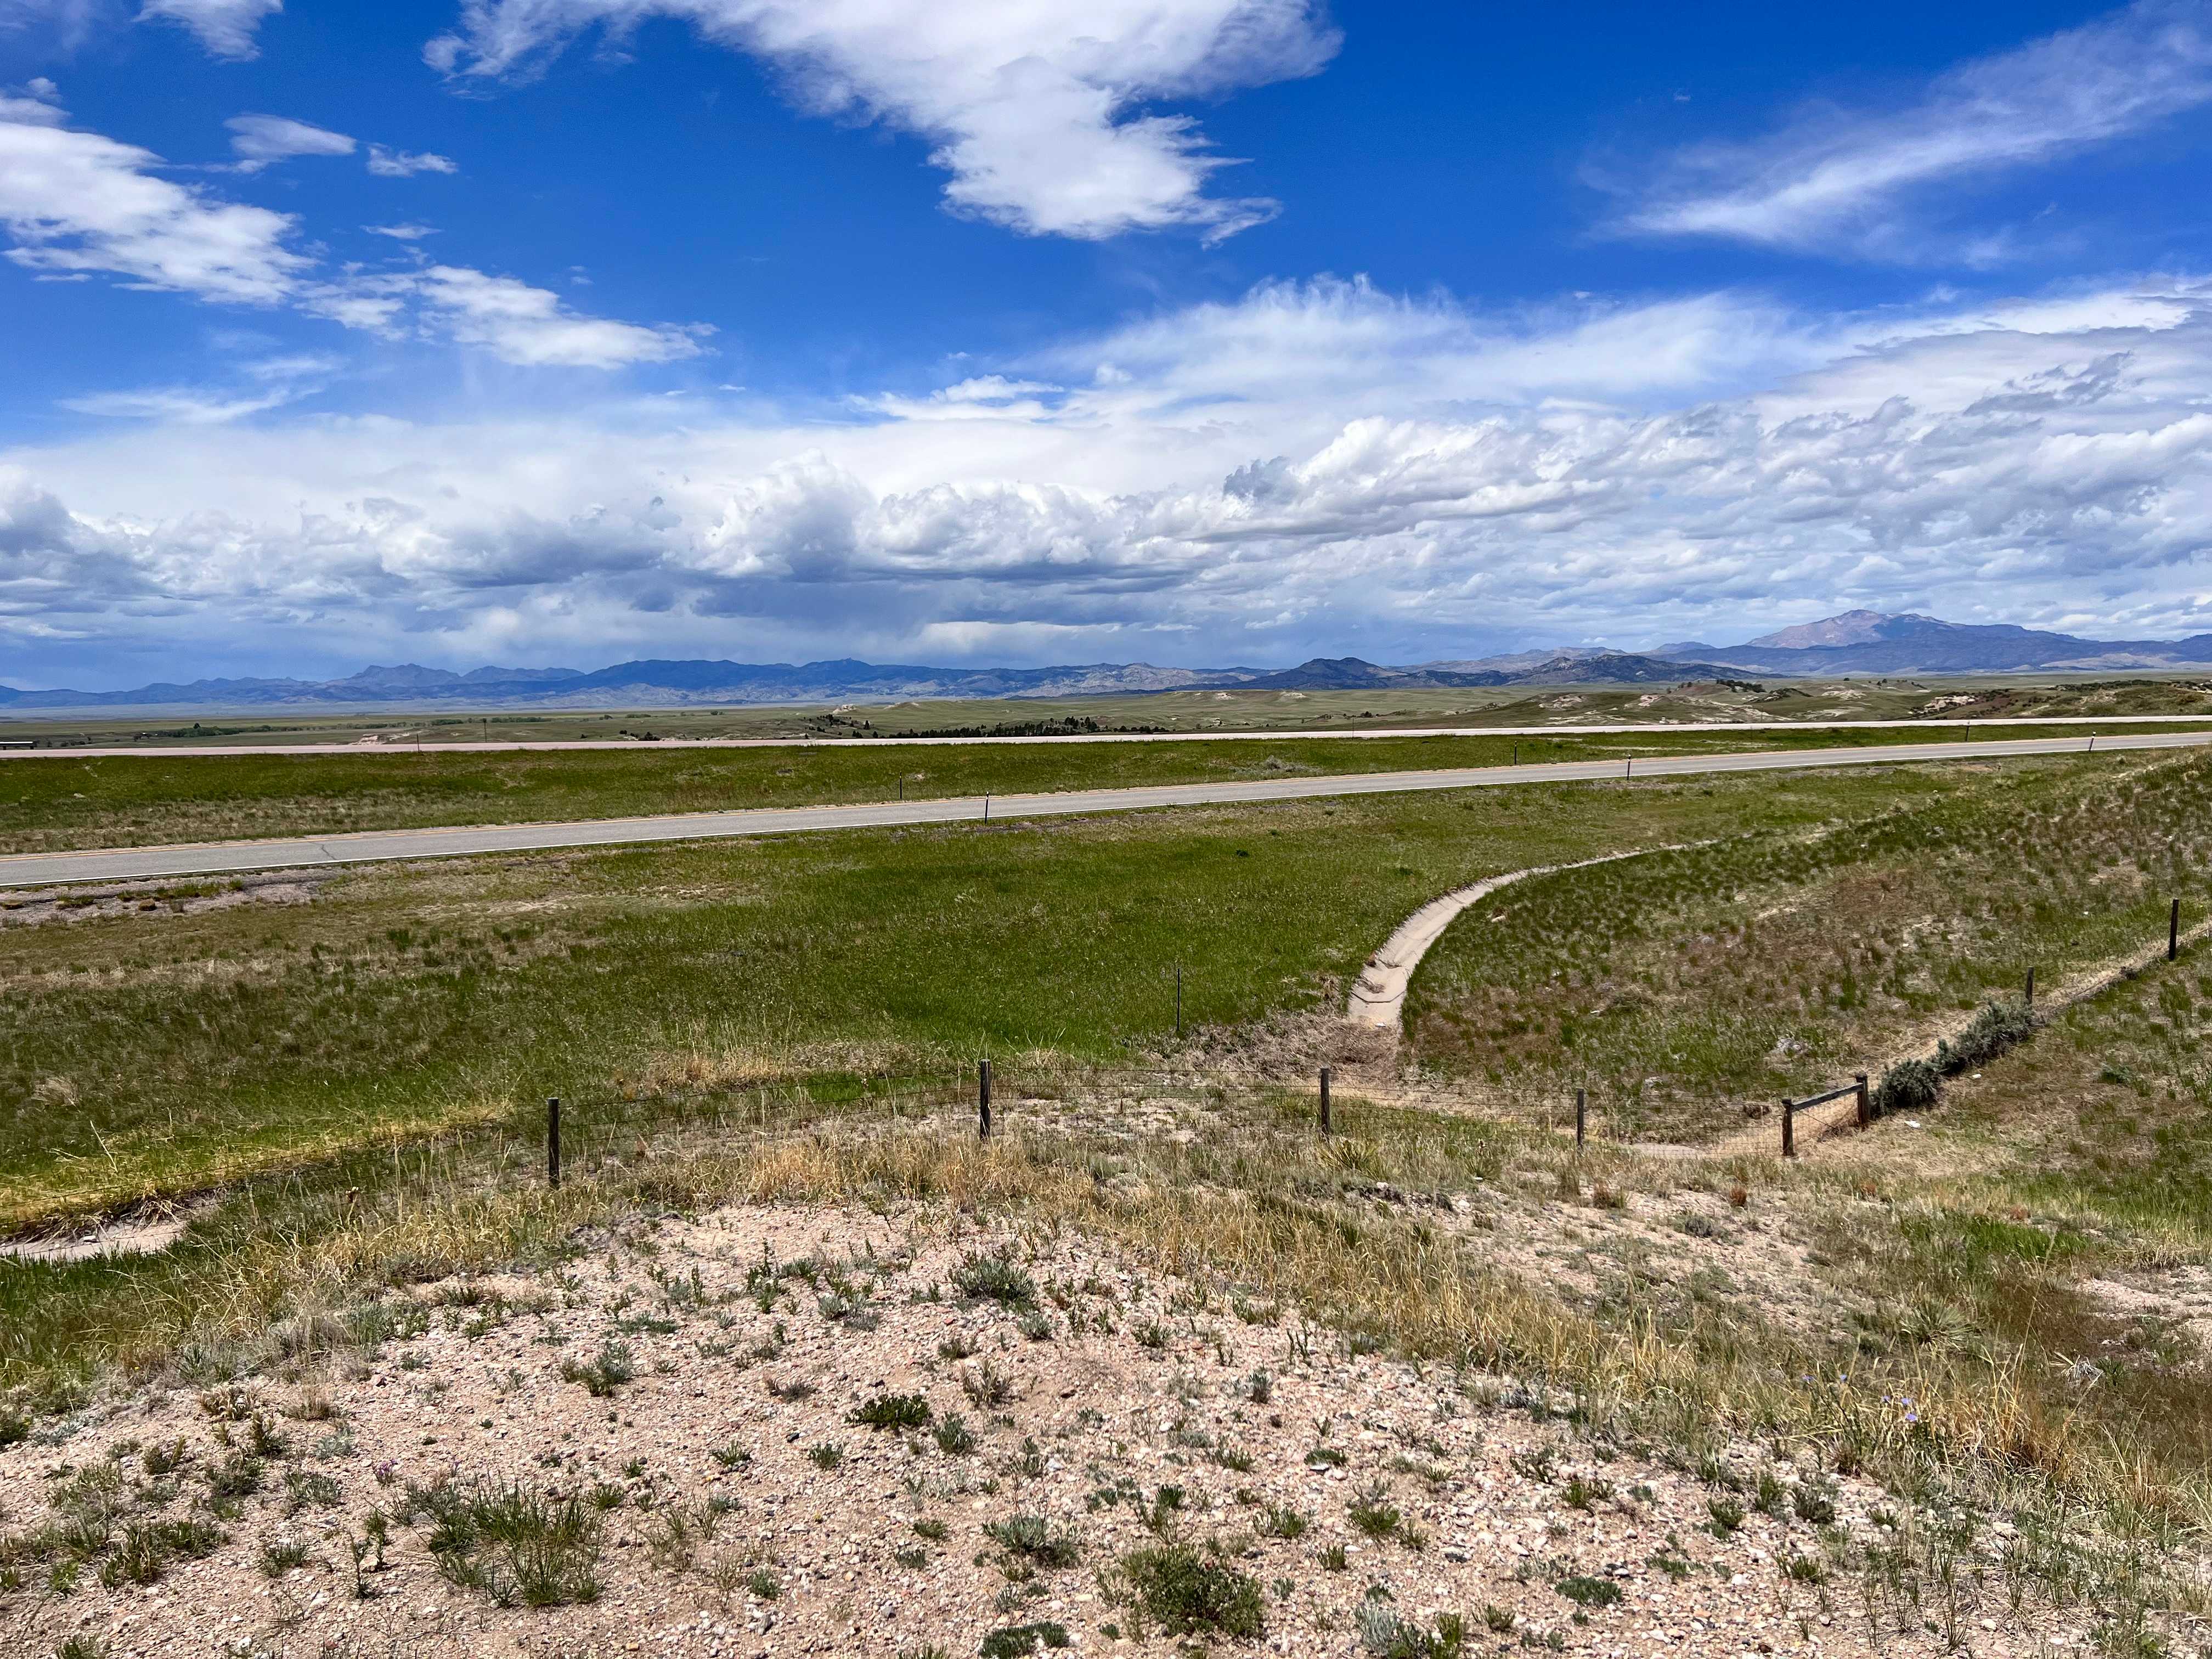 A highway running across a grassy plain, with the large, rocky Laramie Mountains in the background, and the shadows of a sky full of fluffy white clouds reflecting on their peaks.